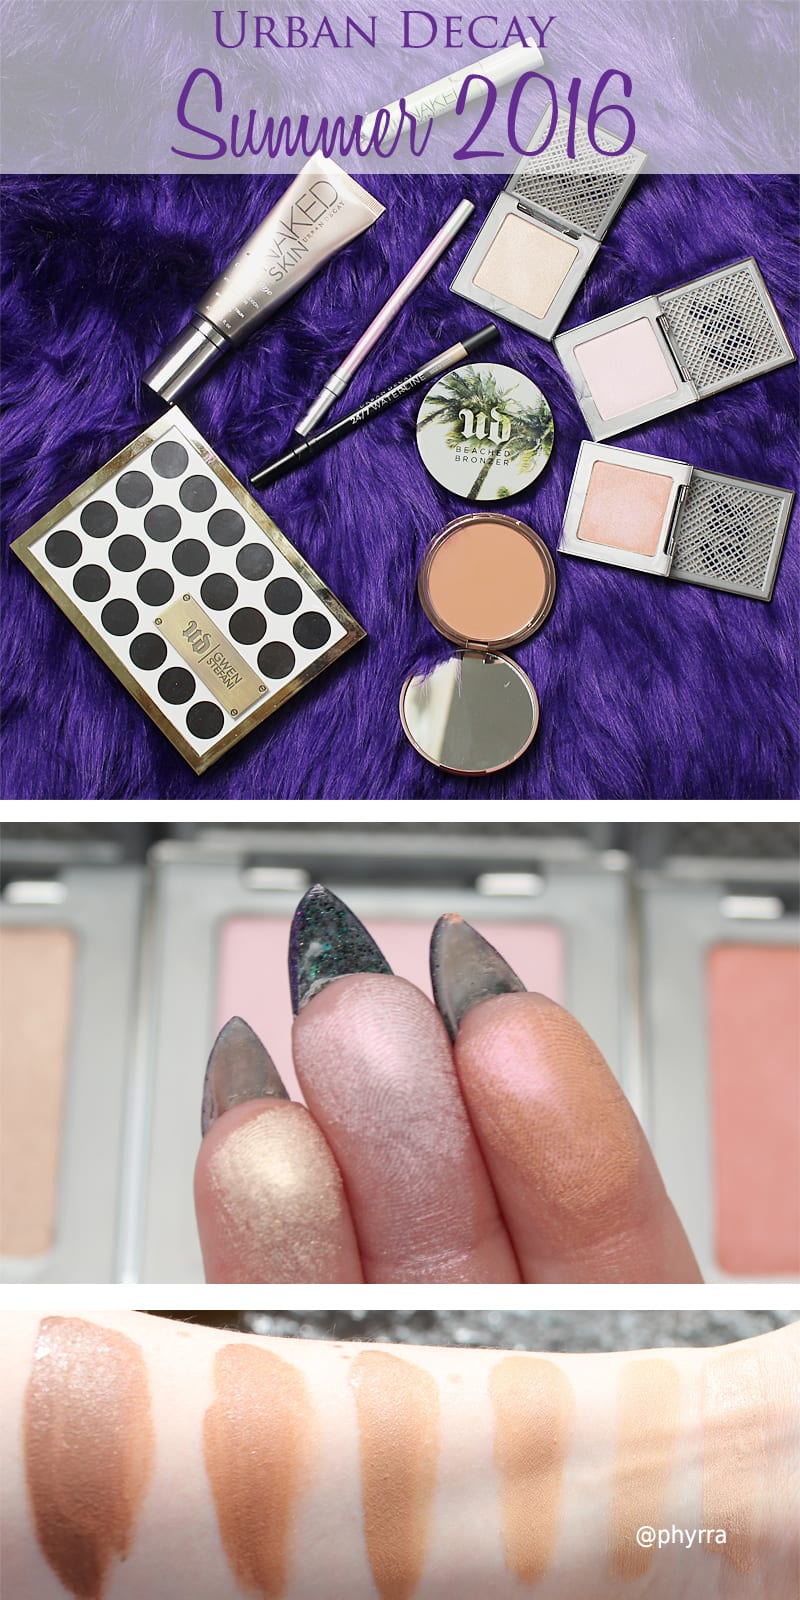 Urban Decay Summer 2016 is Here!